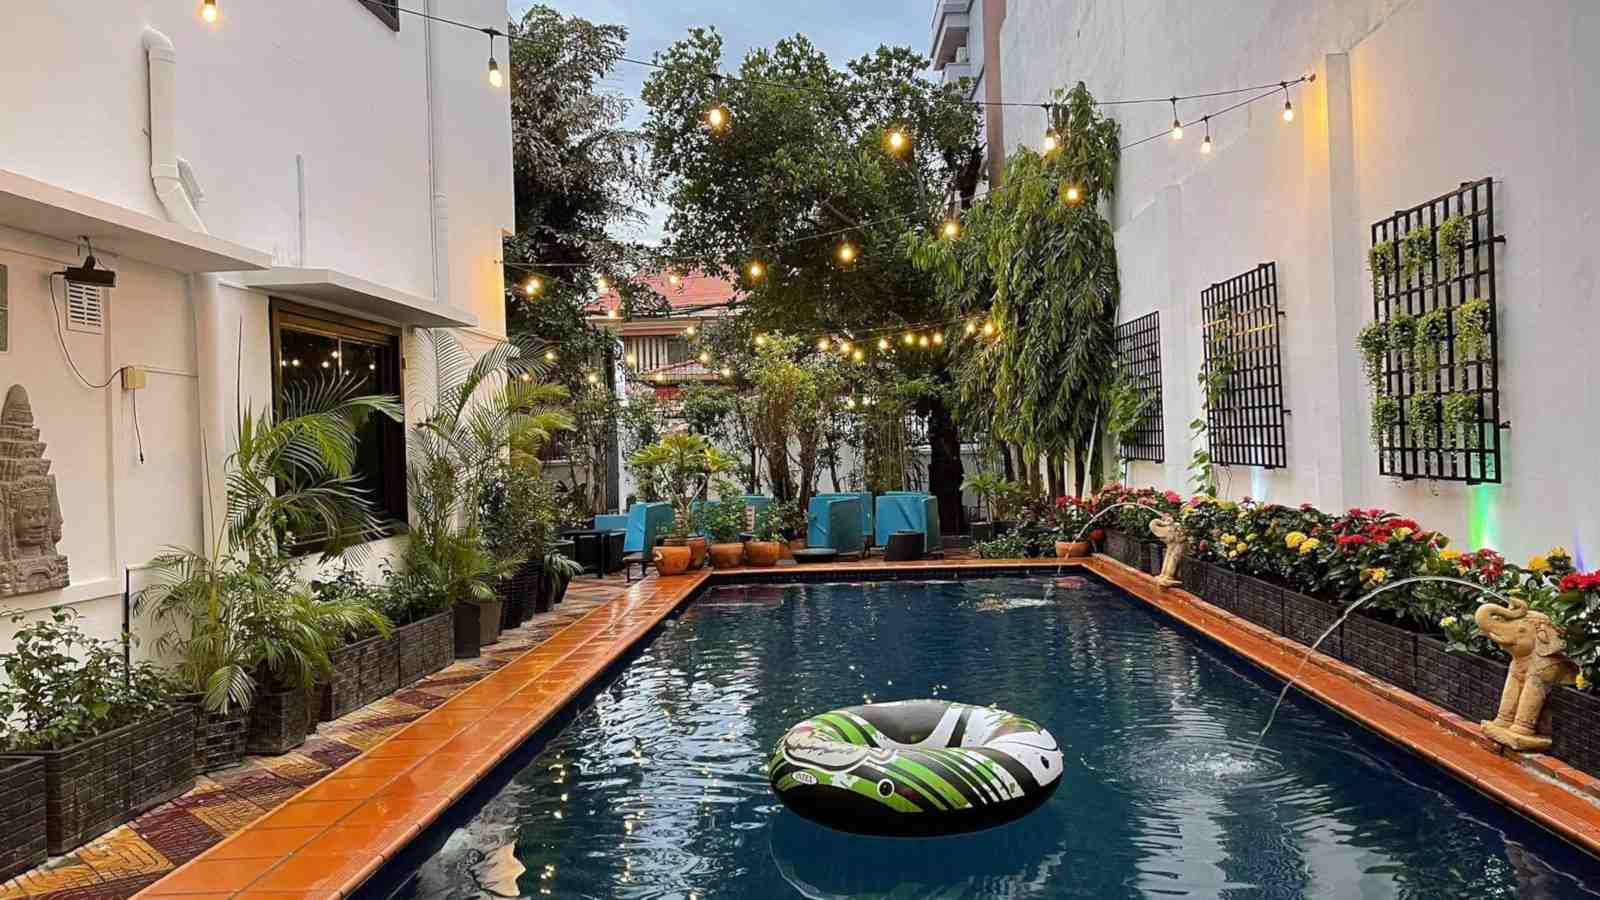 The Birdcage Boutique is a lovely gay owned budget choice of accommodation in Phnom Penh